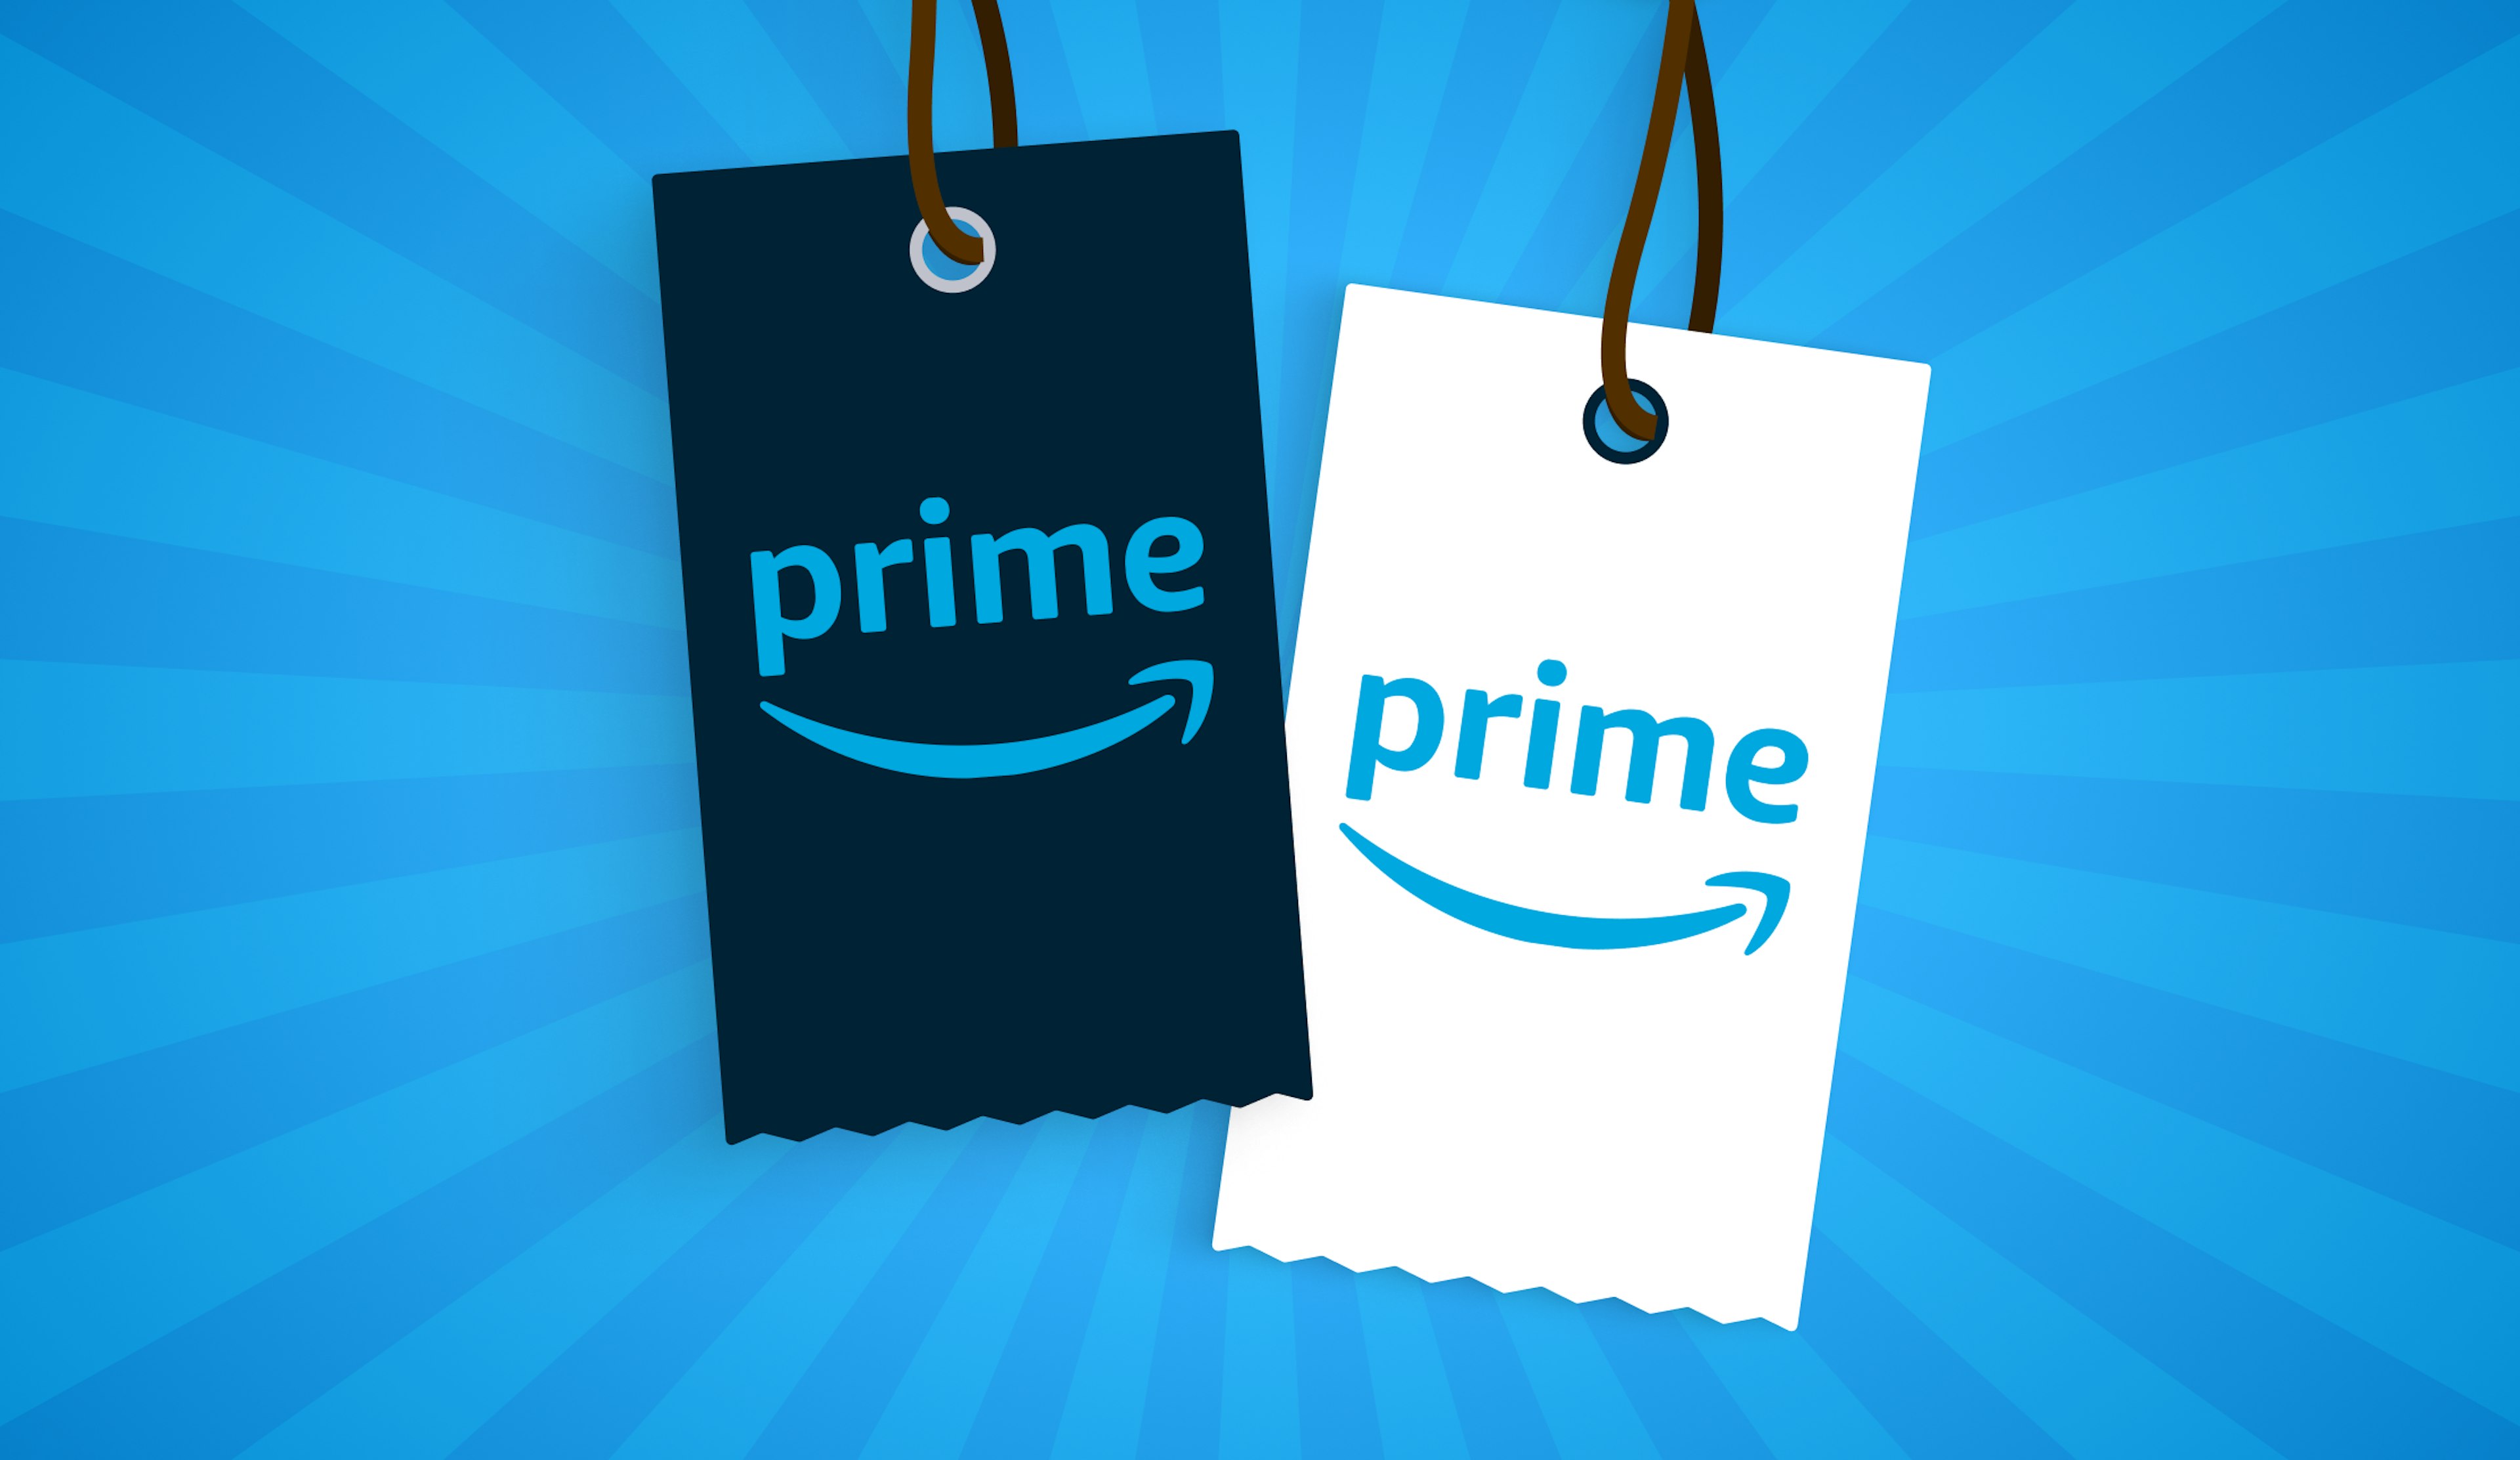 will extend Prime shipping benefits, and its own reach, to